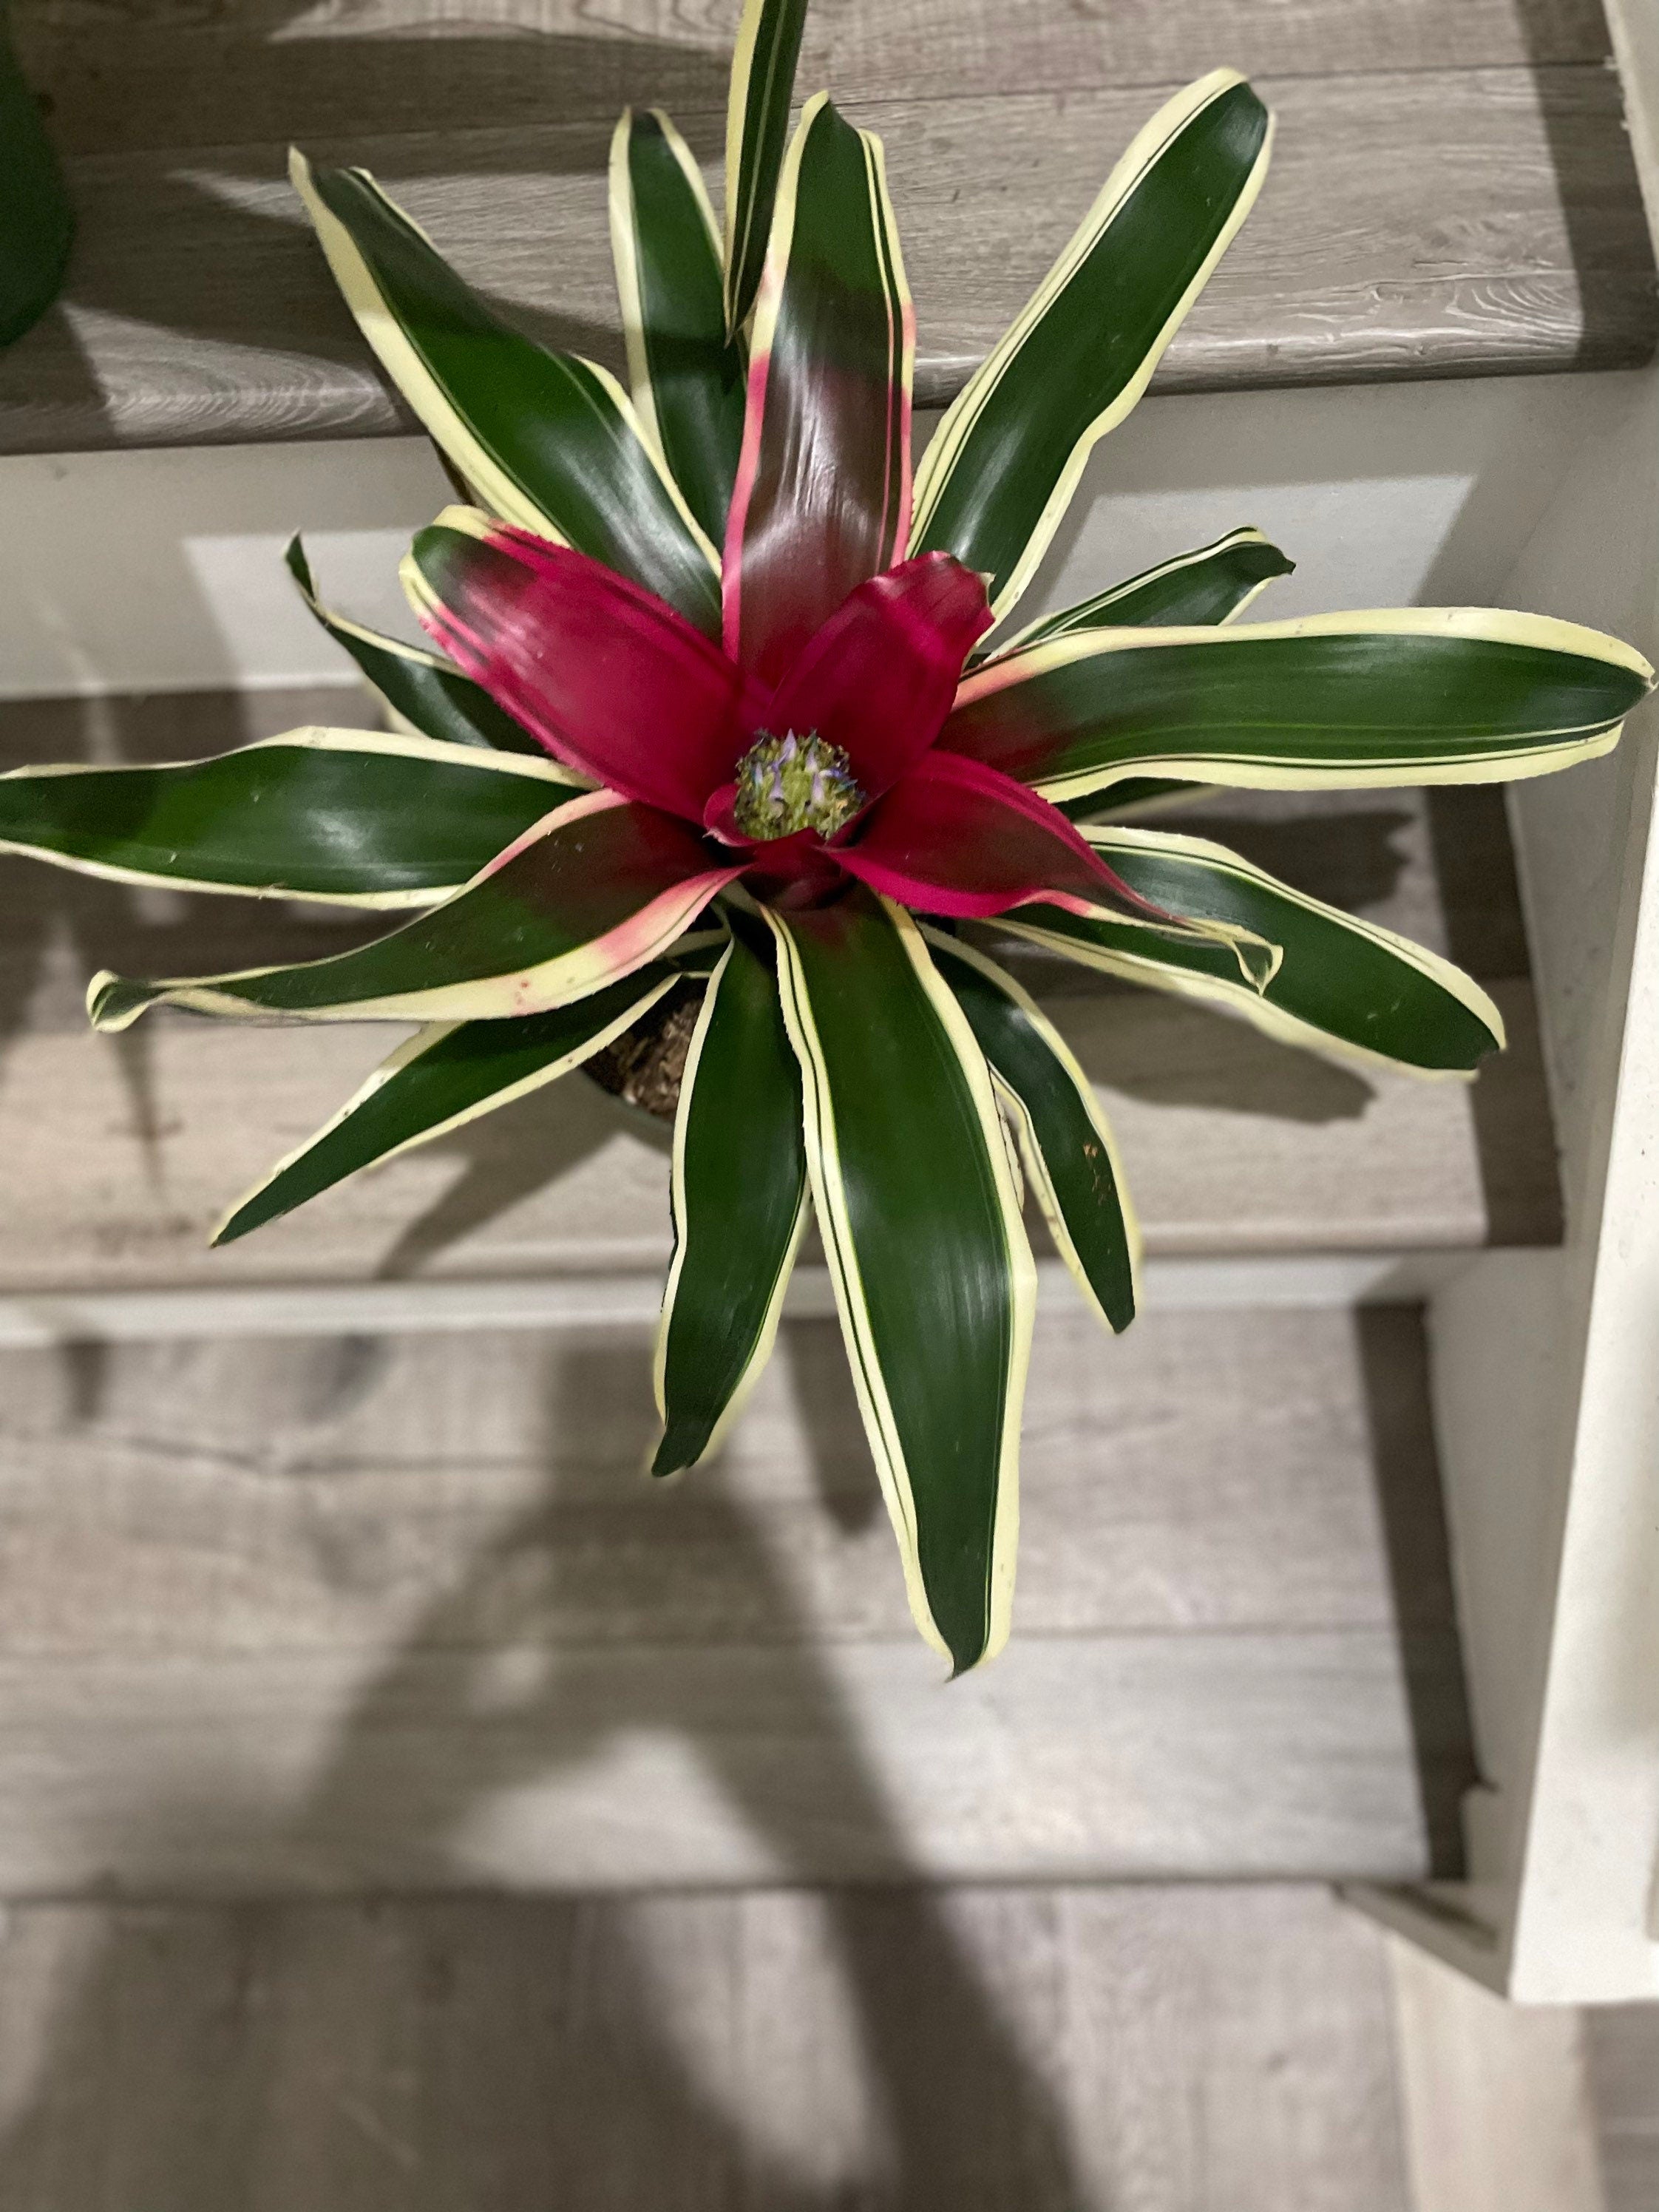 large 6 inch potted-Bromeliad Neoregelia Variegated -easy care keep water in flower cup! Madame Van Durme-V” violet center-not exact